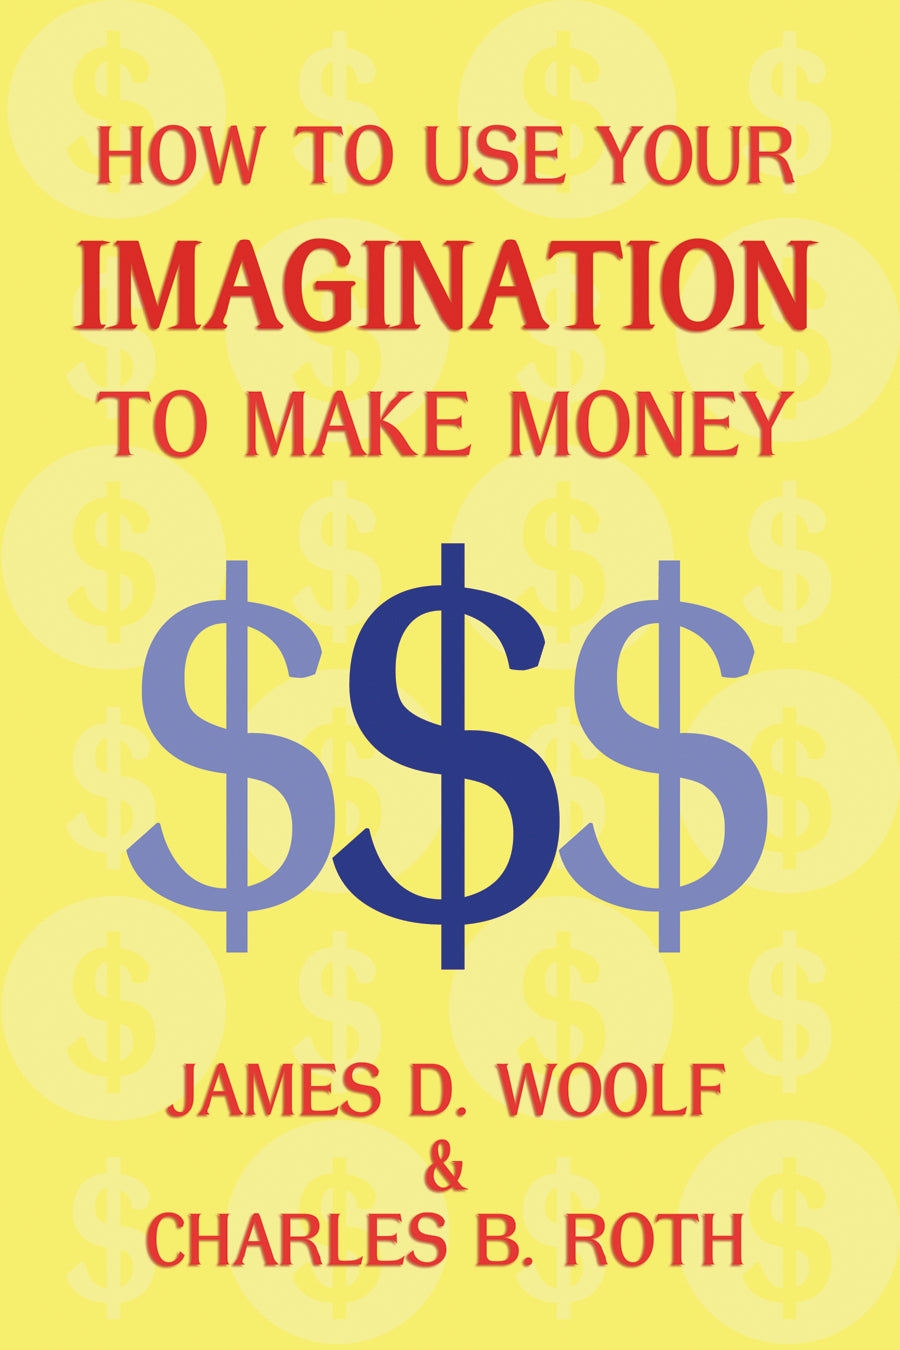 How to Use Your Imagination to Make Money